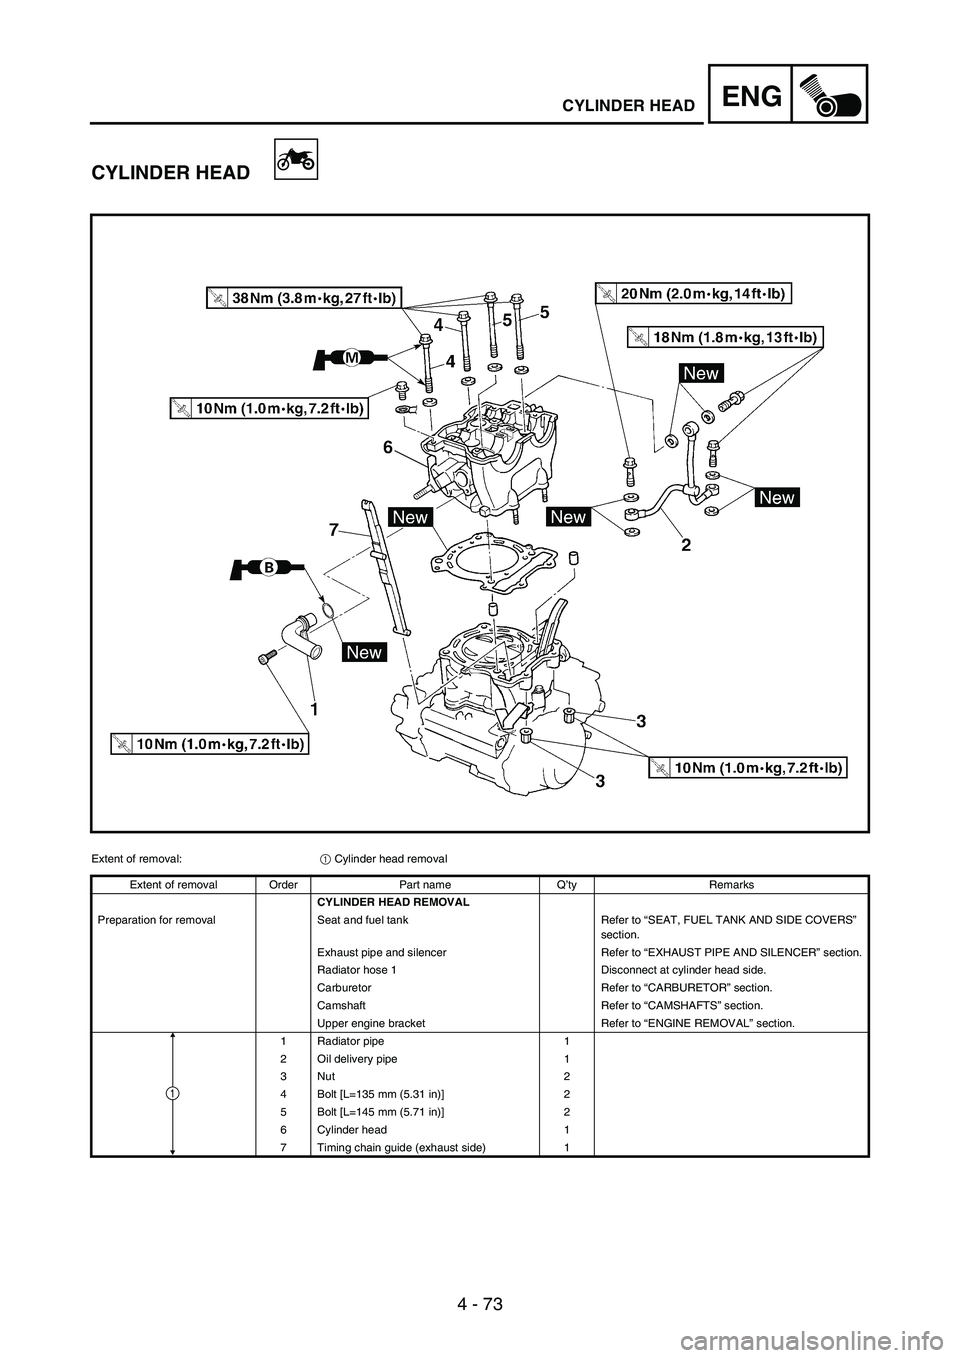 YAMAHA WR 250F 2004  Manuale de Empleo (in Spanish) 4 - 73
ENGCYLINDER HEAD
CYLINDER HEAD
Extent of removal:
1 Cylinder head removal
Extent of removal Order Part name Q’ty Remarks
CYLINDER HEAD REMOVAL
Preparation for removal Seat and fuel tank Refer